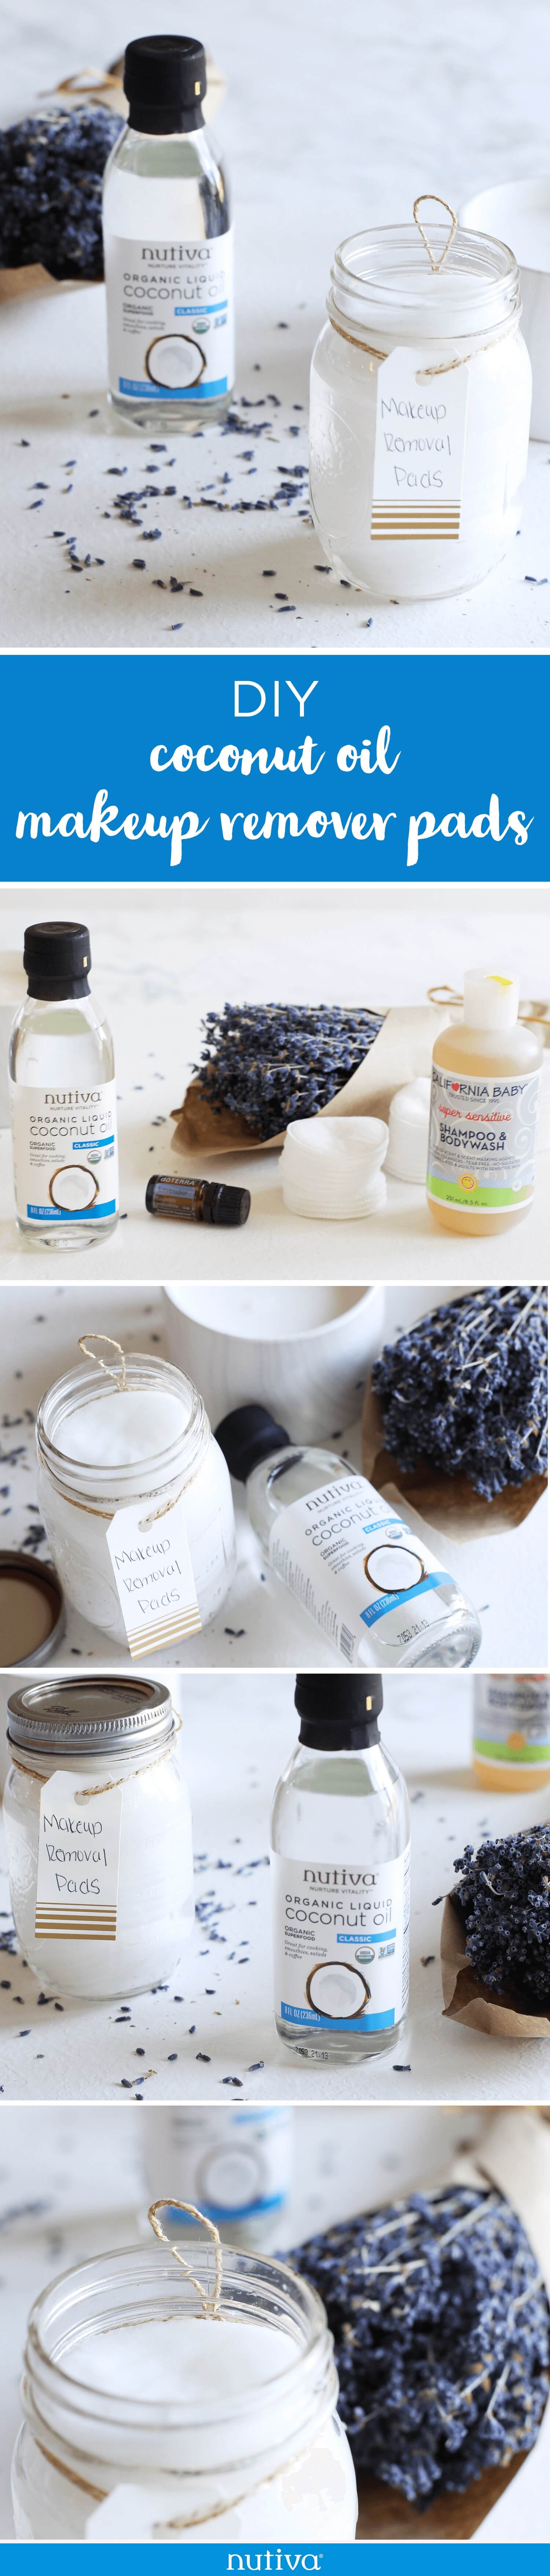 Coconut Oil Makeup Remover How To A